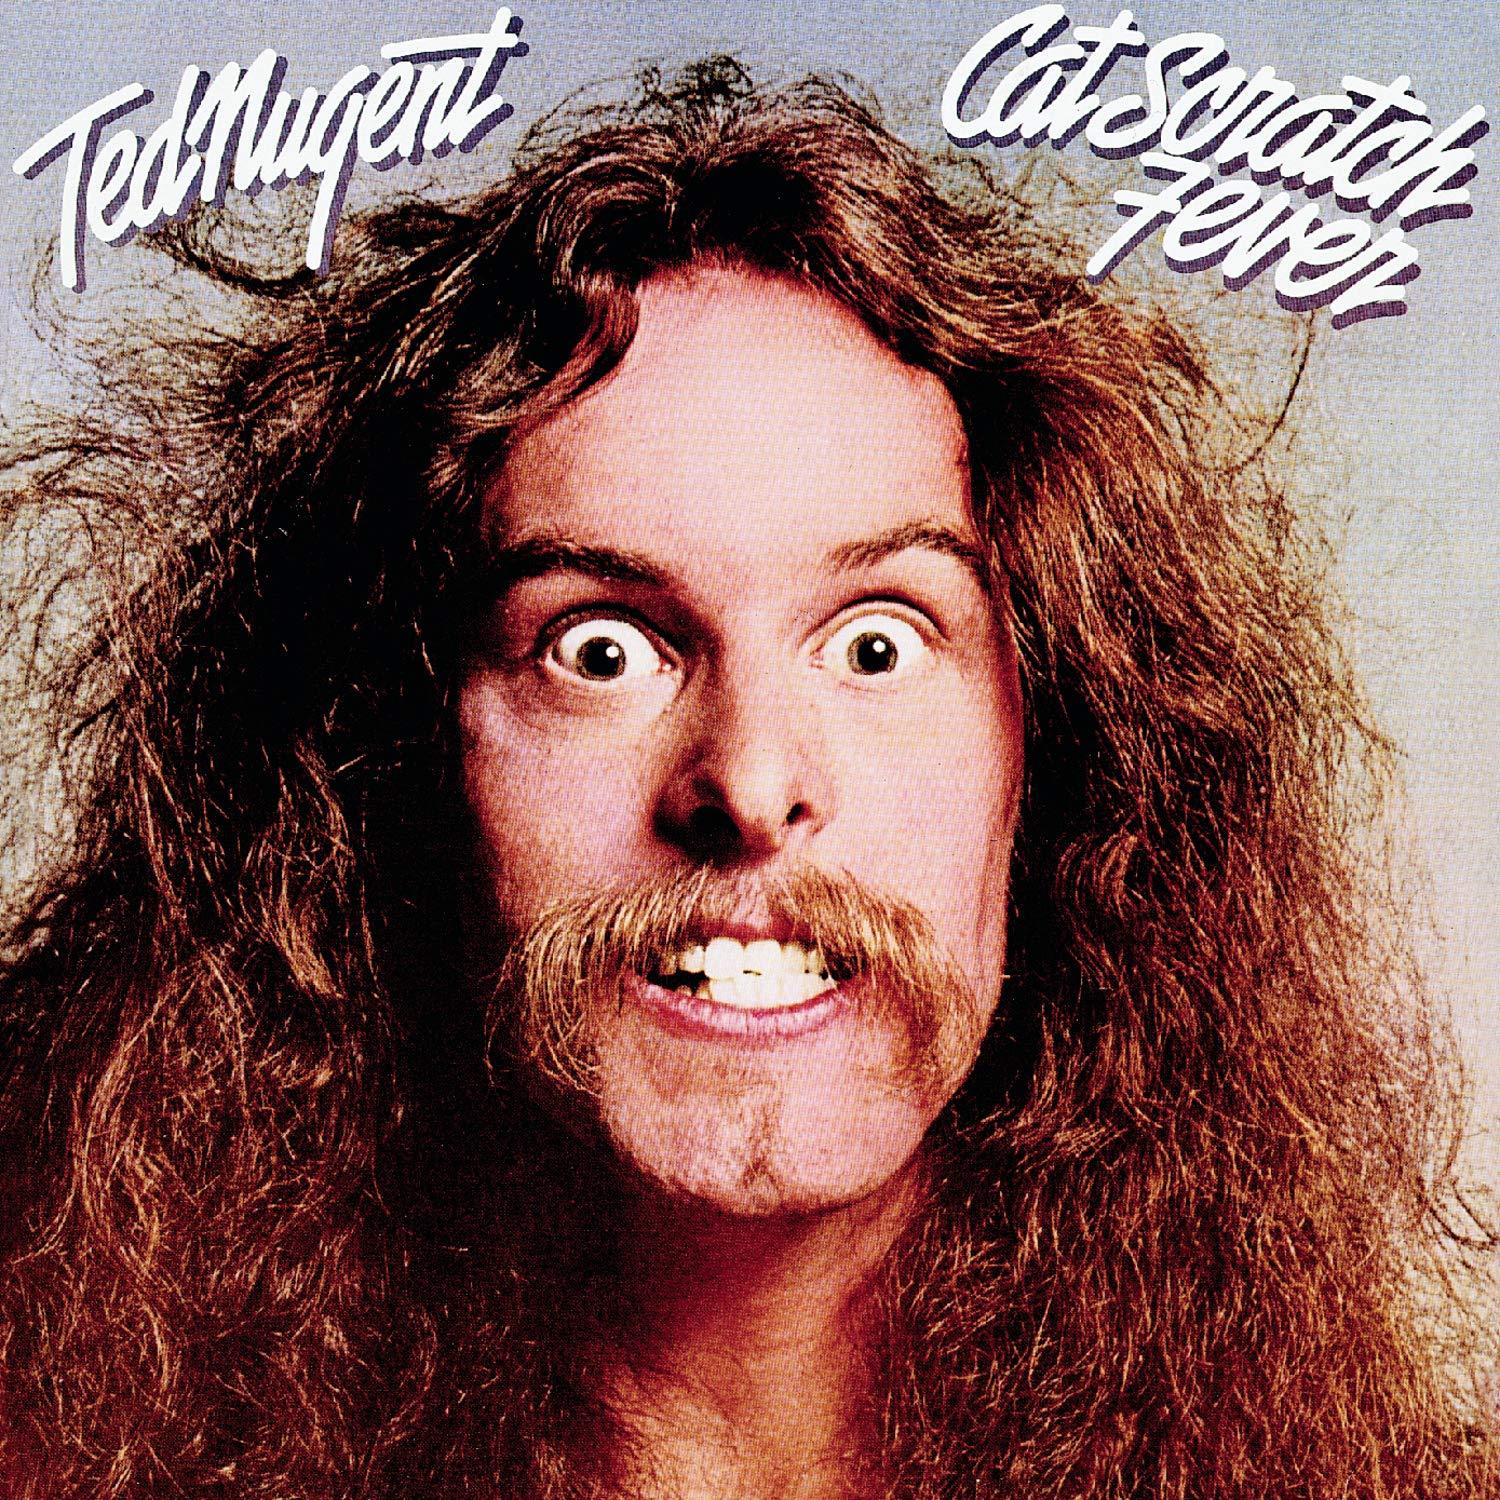 Slike TED NUGENT - Cat scratch fever red